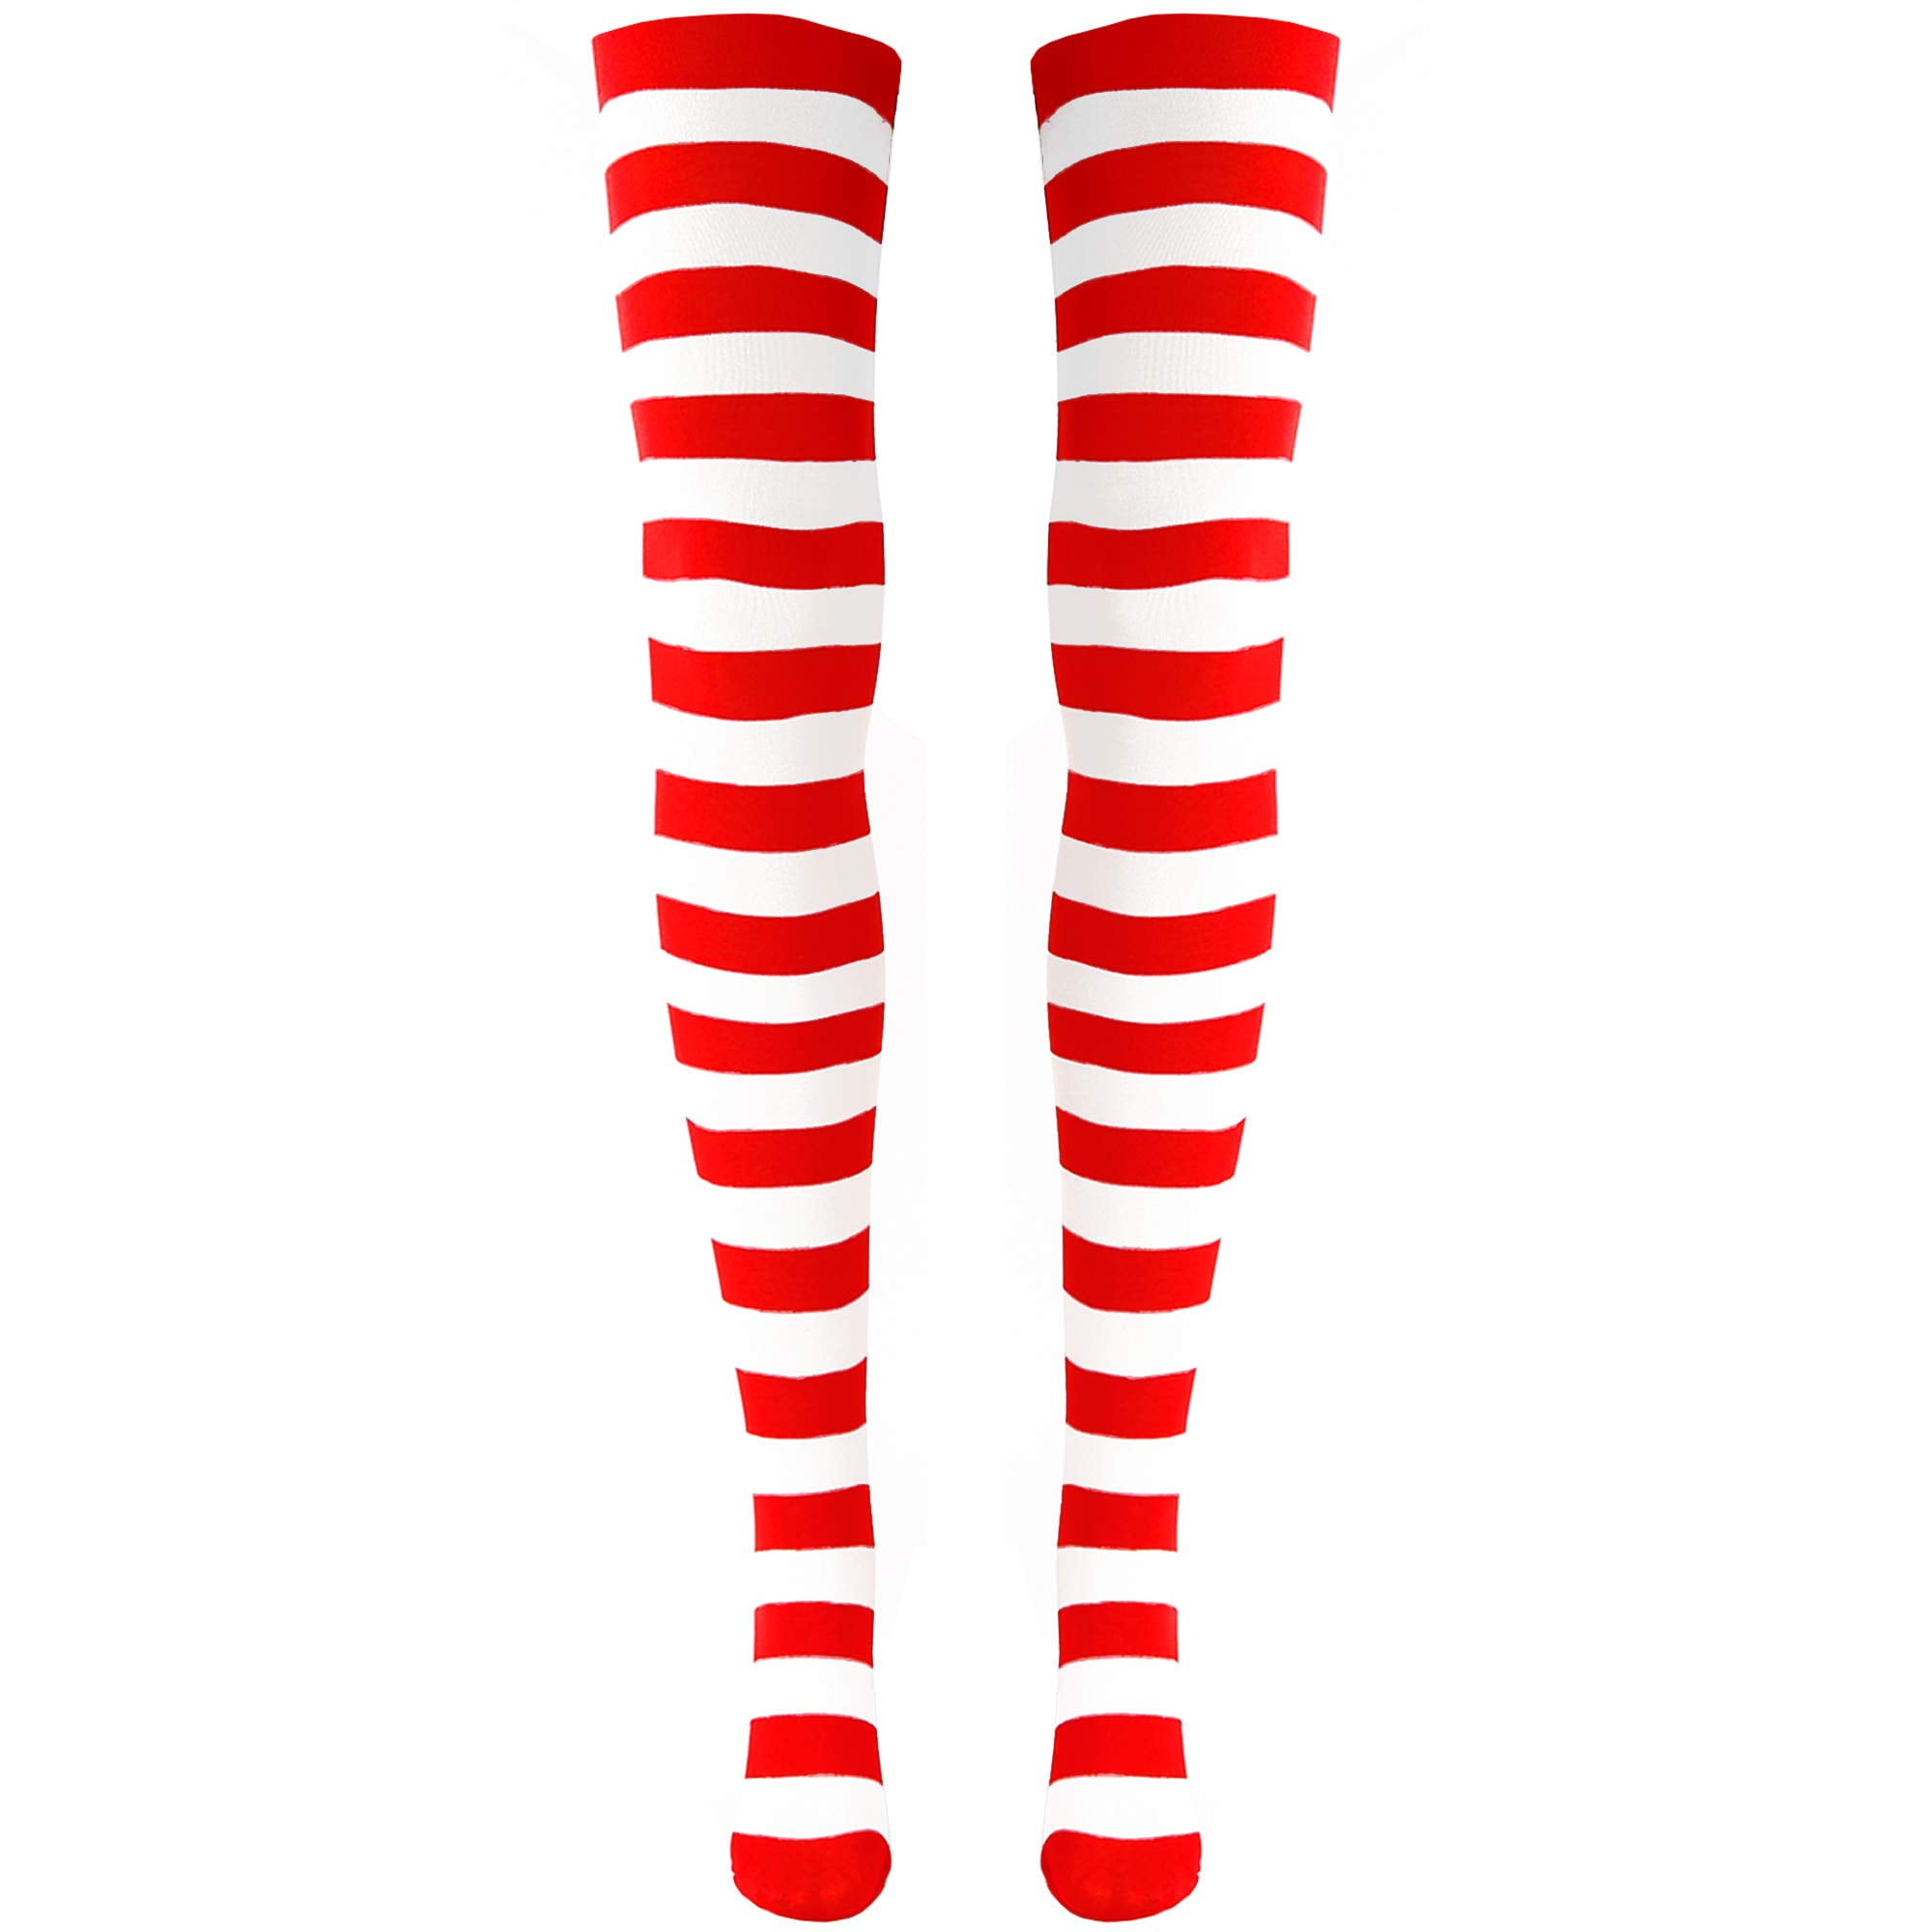 Skeleteen Red and Socks - Over The Striped Costume Accessories Red and White Stockings for Men, Women and Kids -